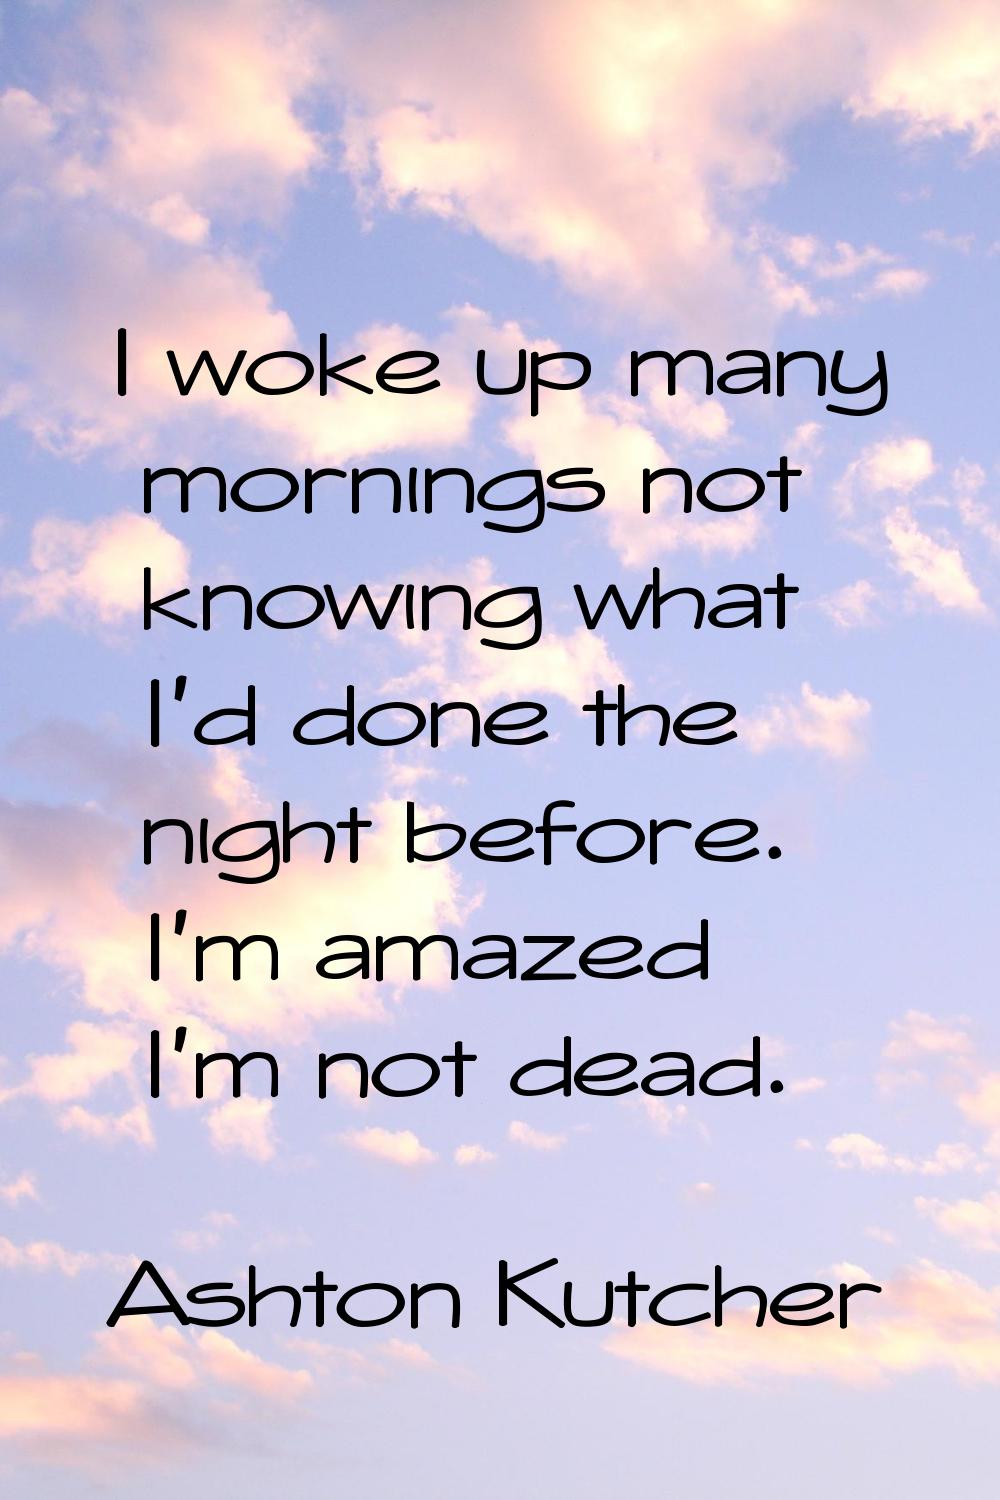 I woke up many mornings not knowing what I'd done the night before. I'm amazed I'm not dead.